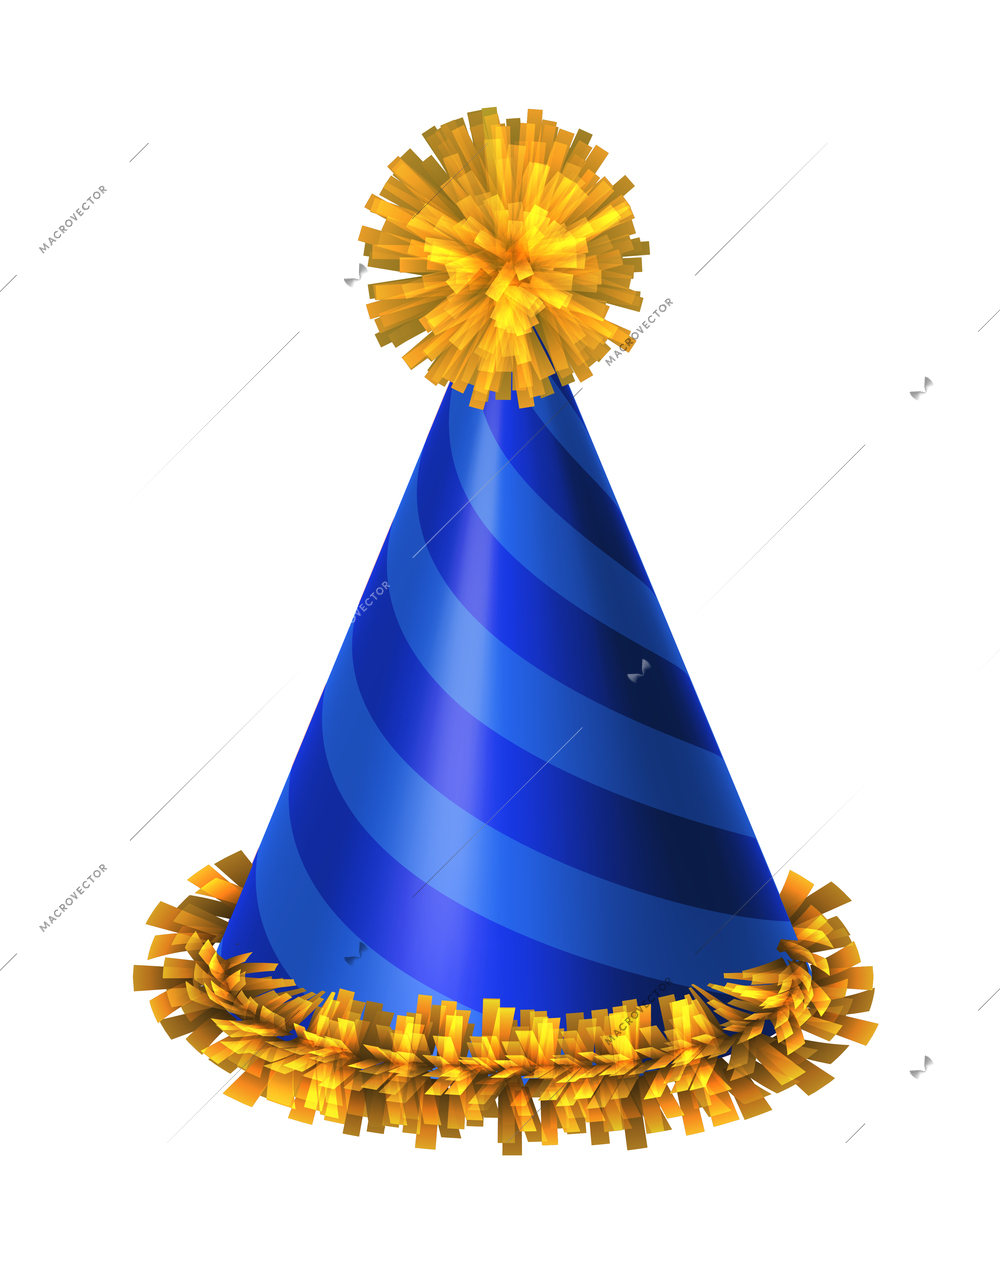 Realistic colorful paper party hat on white background vector illustration